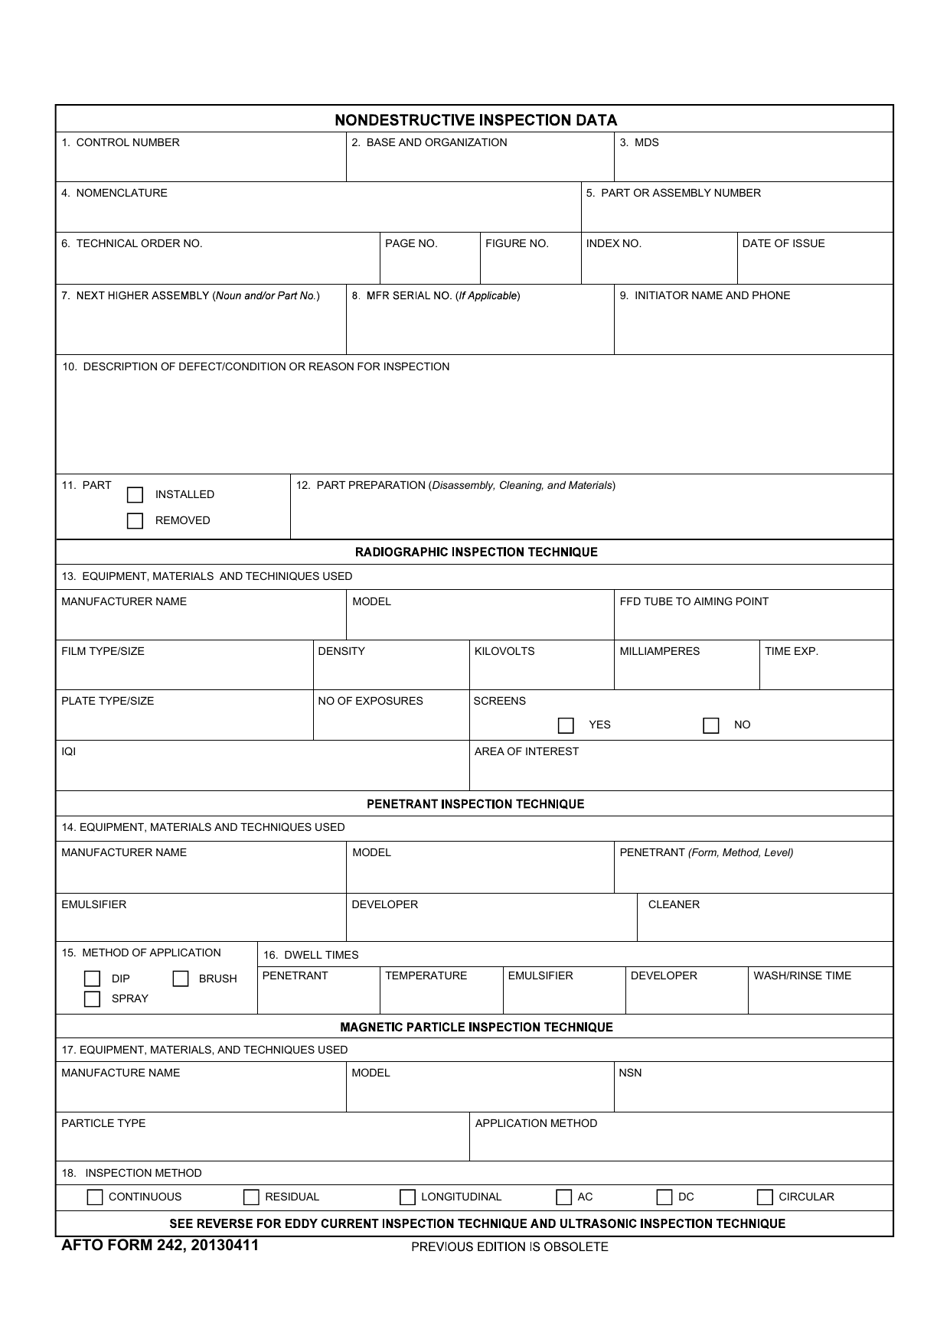 AFTO Form 242 Nondestructive Inspection Data, Page 1